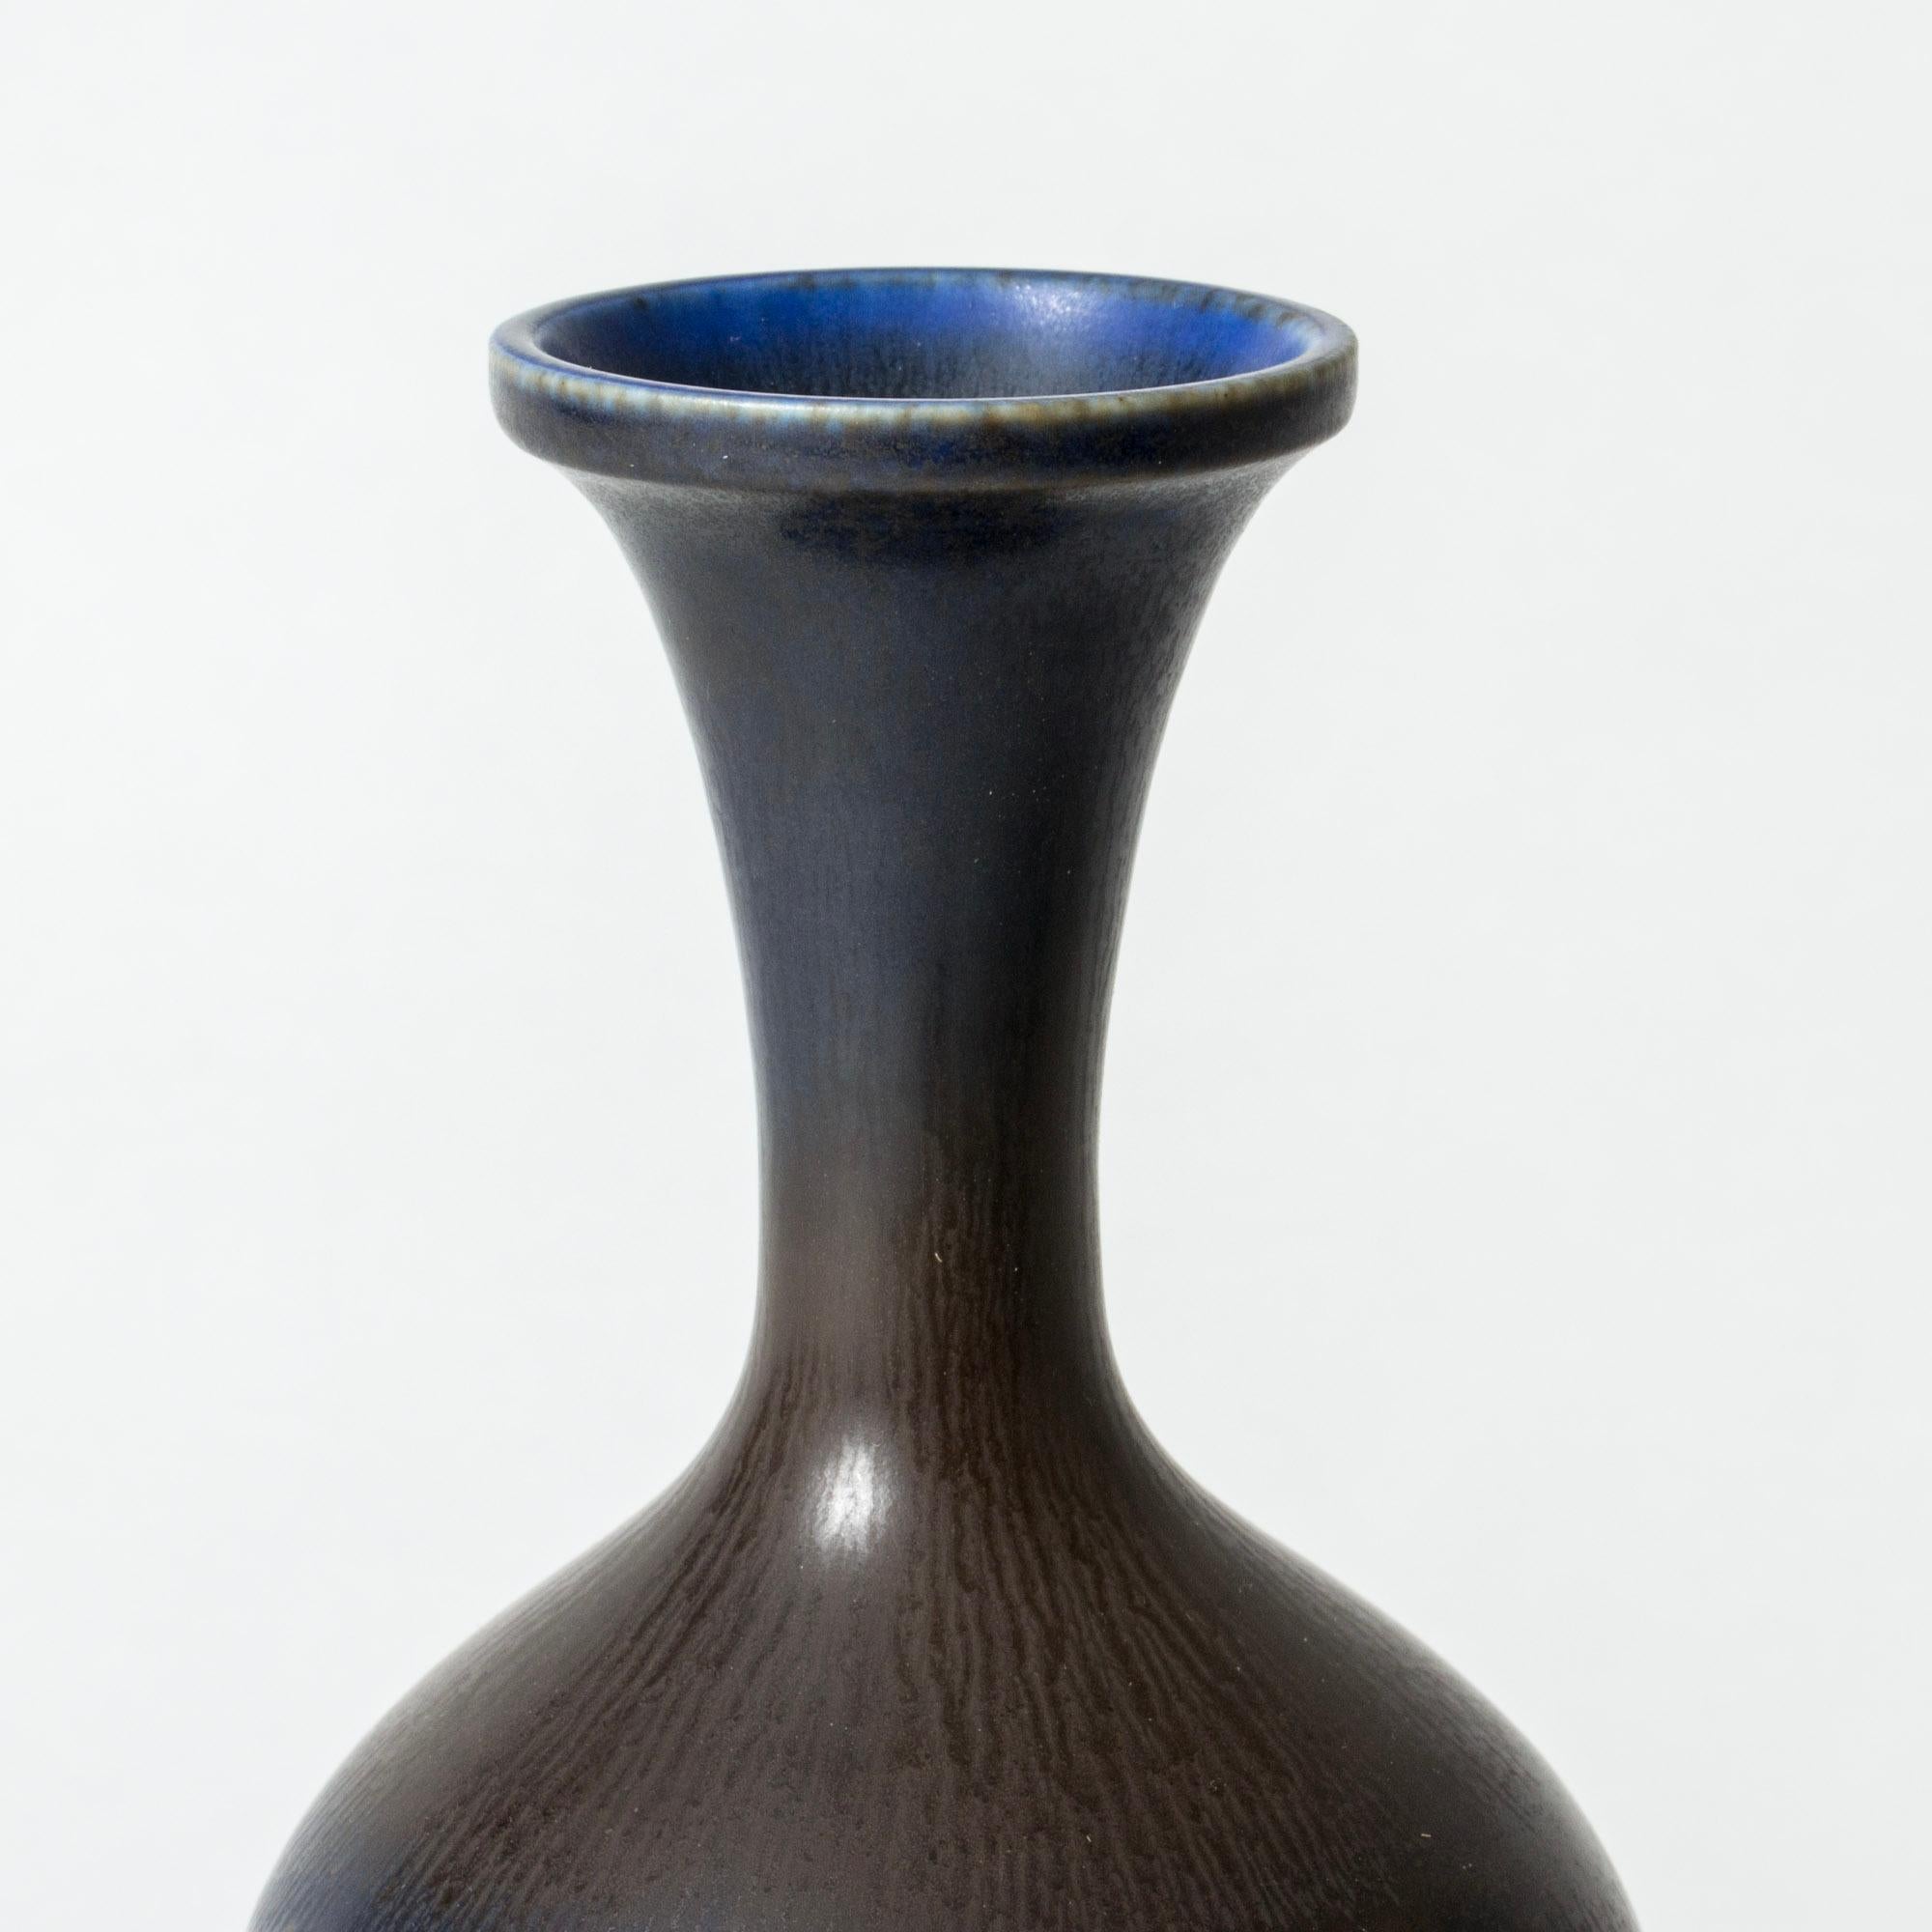 Stoneware vase by Berndt Friberg, in an elegant sleek form. Beautiful dark blue hare’s fur glaze.

Berndt Friberg was a Swedish ceramicist, renowned for his stoneware vases and vessels for Gustavsberg. His pure, composed designs with satiny,